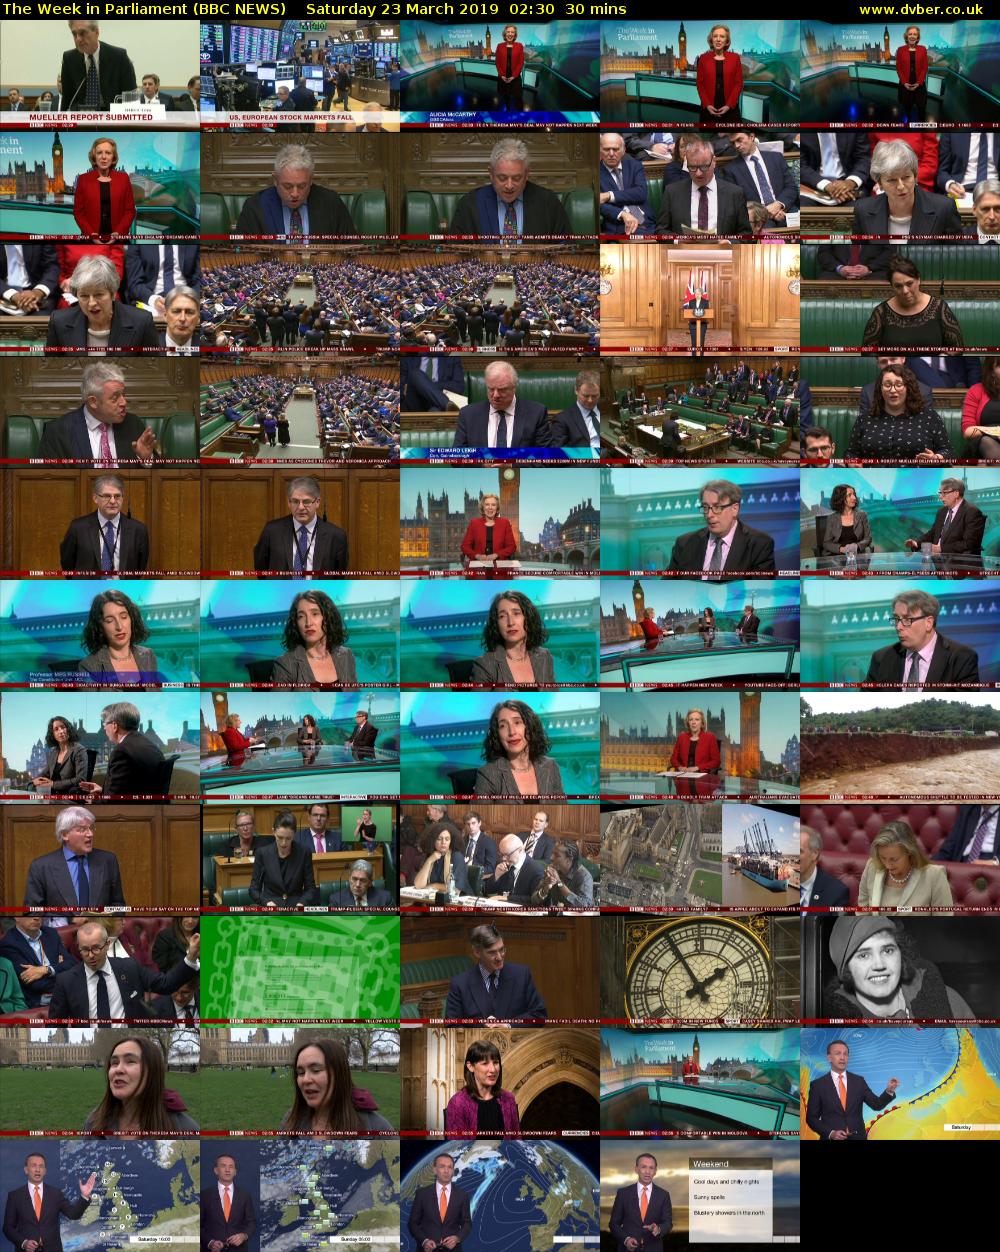 The Week in Parliament (BBC NEWS) Saturday 23 March 2019 02:30 - 03:00